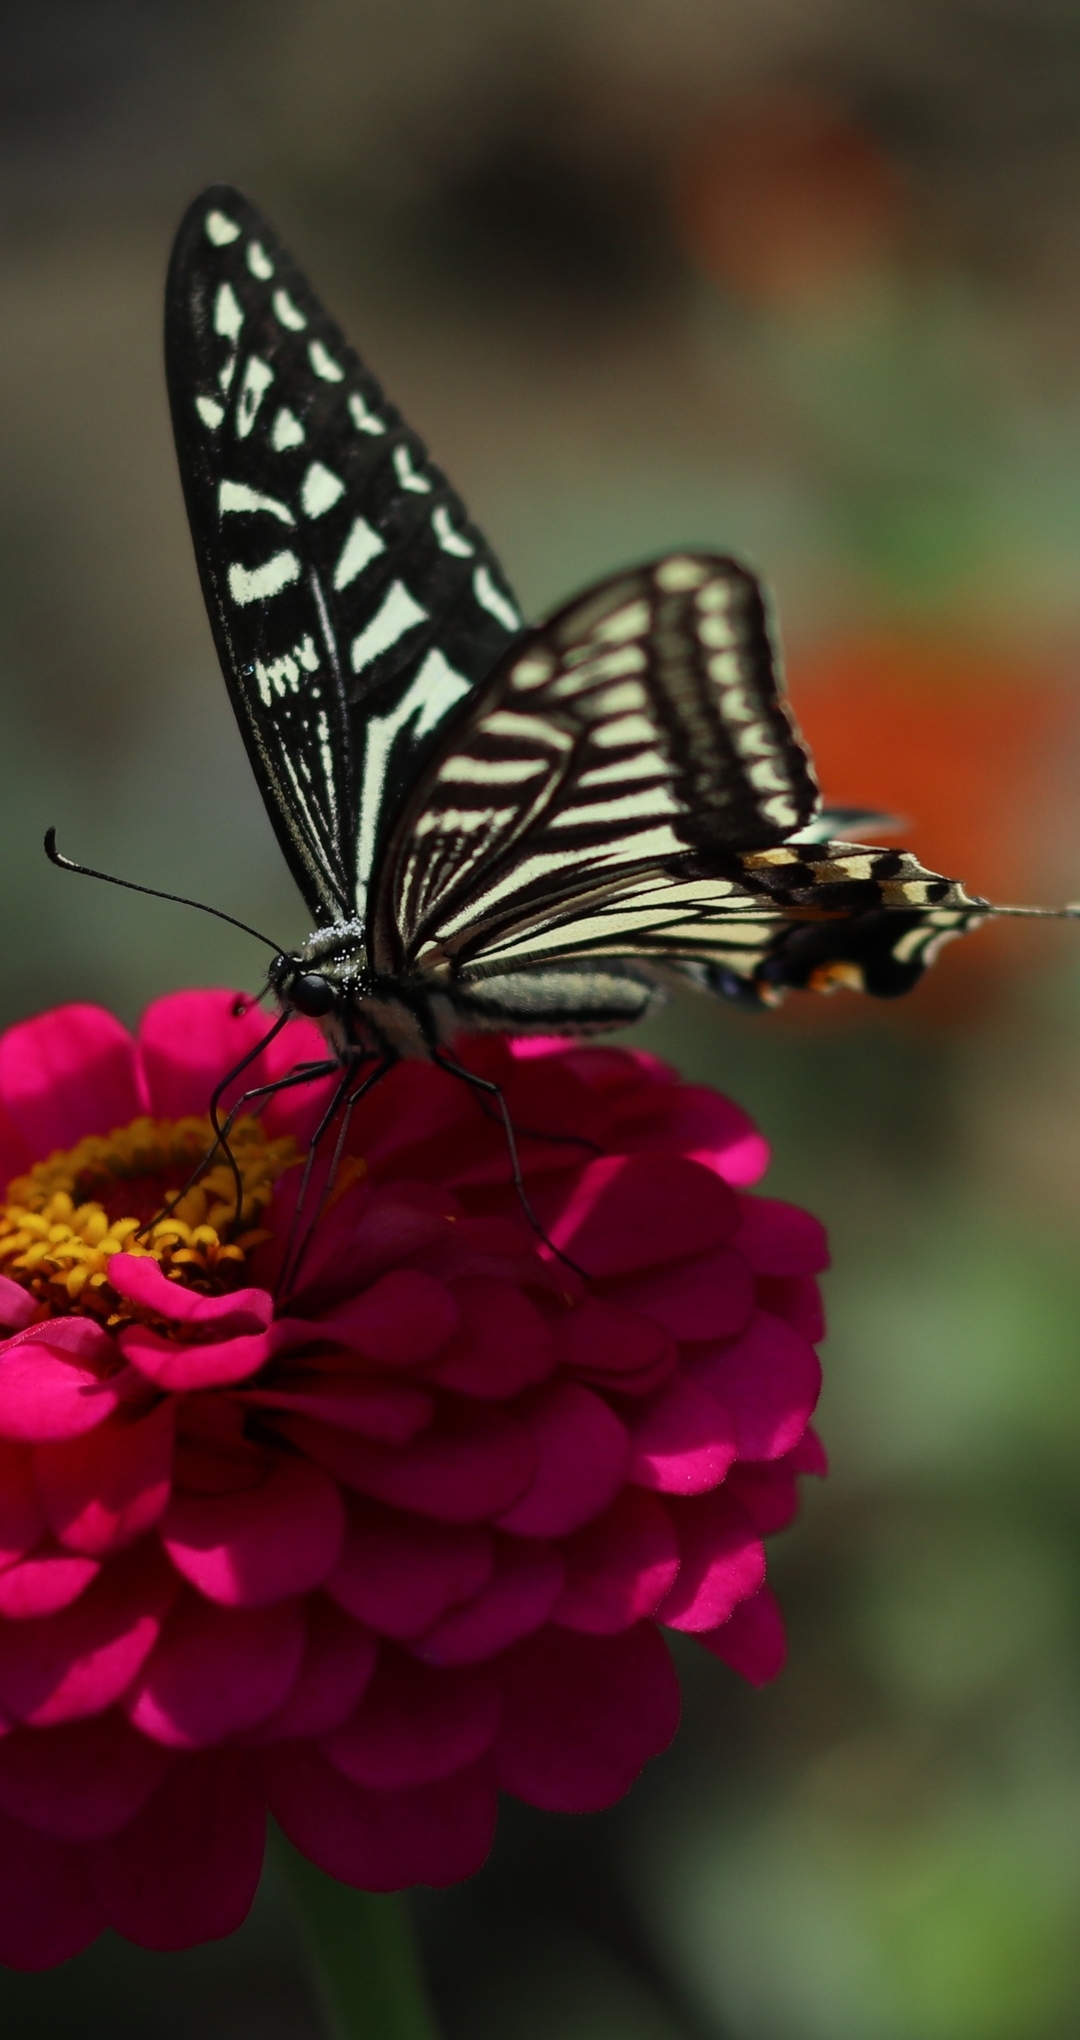 Image: butterfly, black-white butterfly, flowers